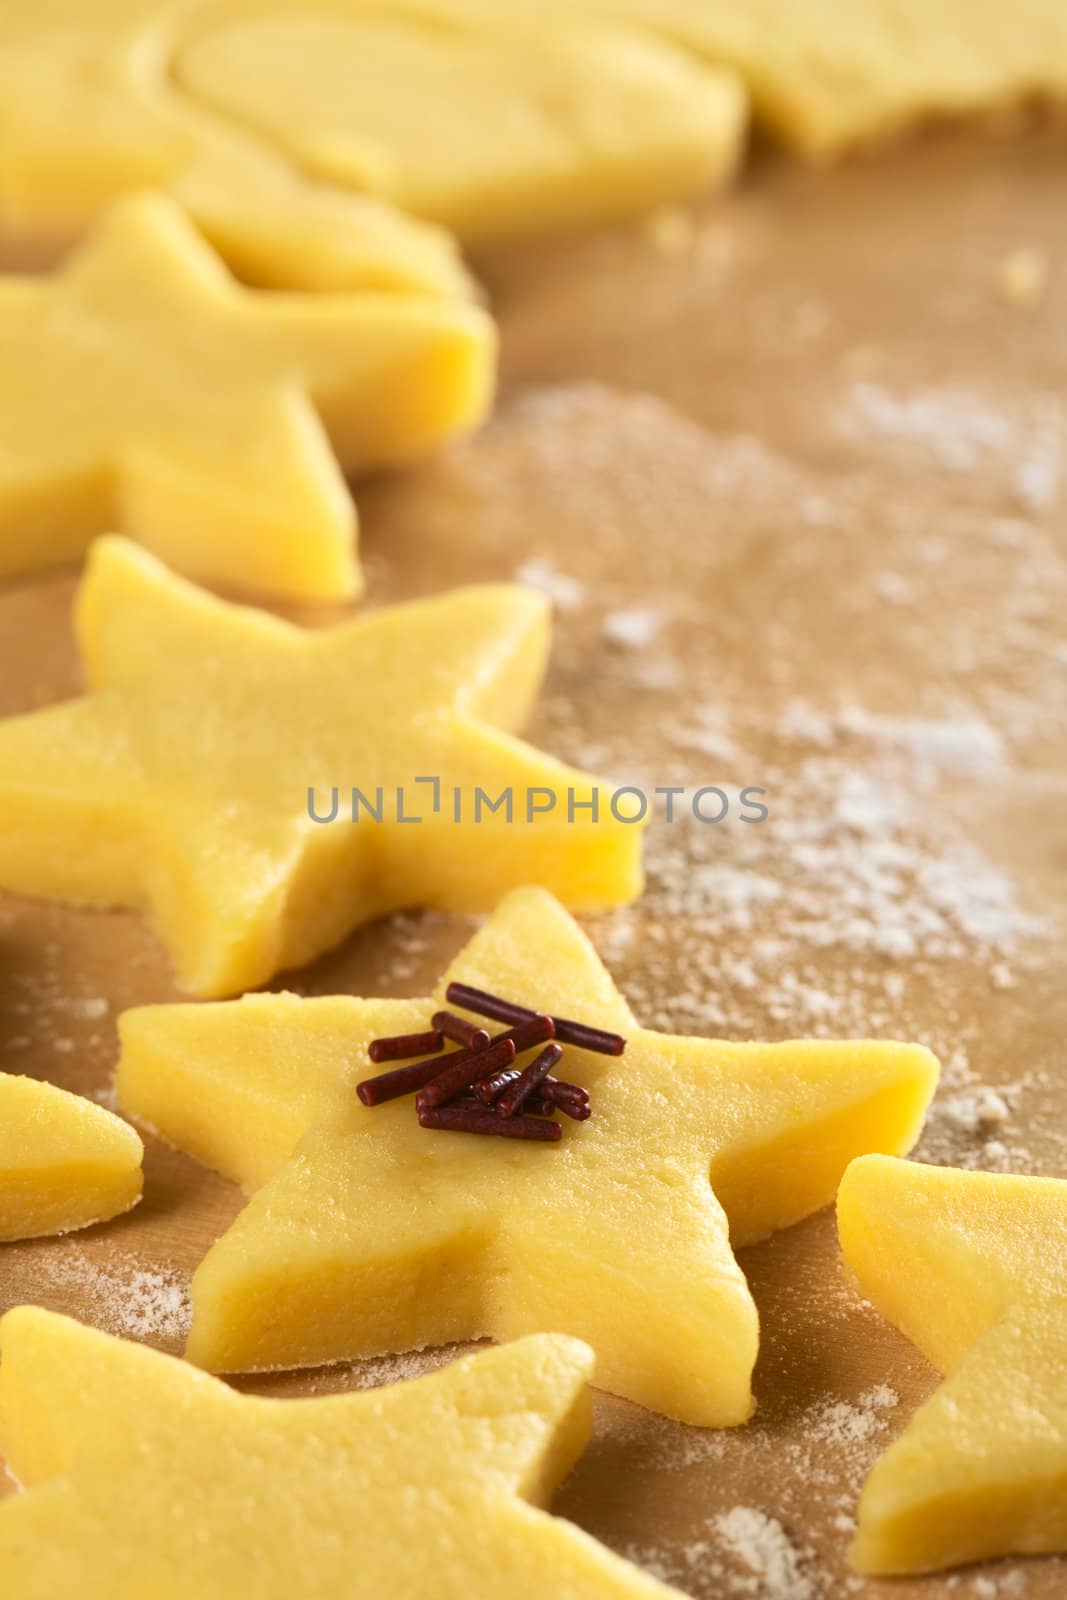 Unbaked star-shaped cookies with chocolate sprinkles on floured wooden surface (Selective Focus, Focus on the front of the chocolate sprinkles)